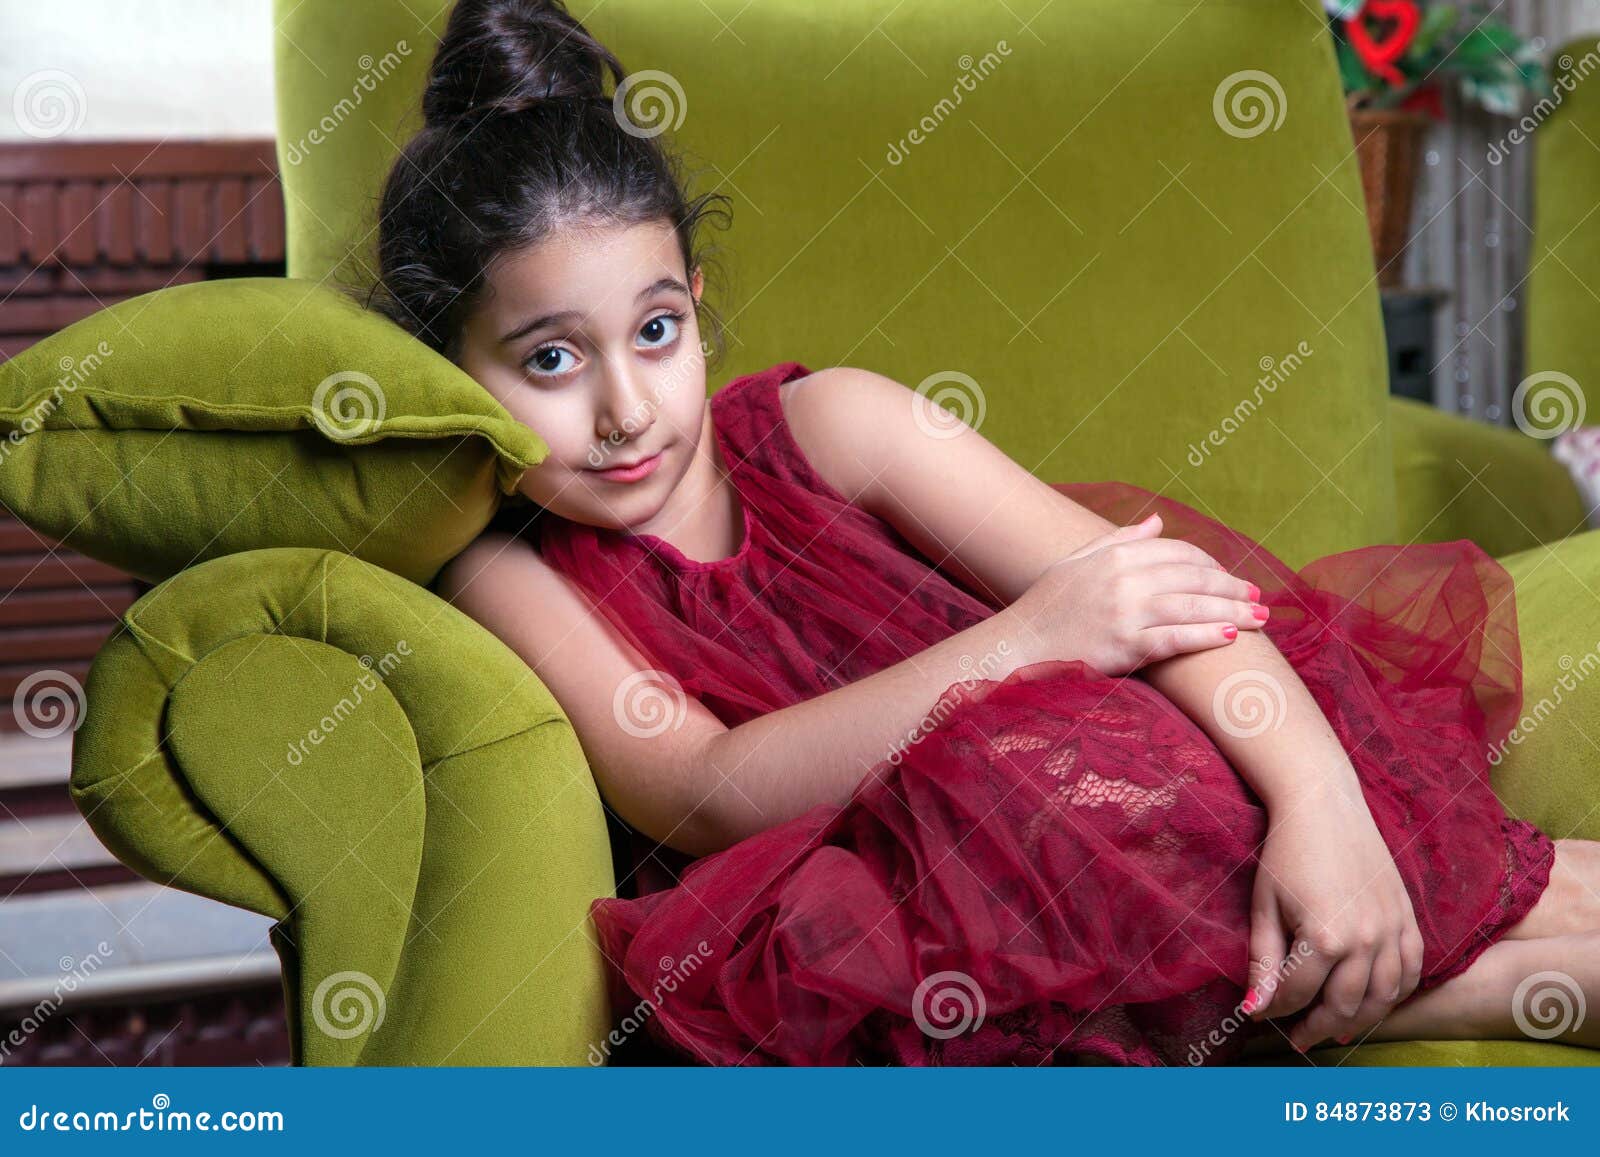 Cute Lovlely Middle Eastern Girl With Dark Red Dress And Collected Hair Posing And Liying On